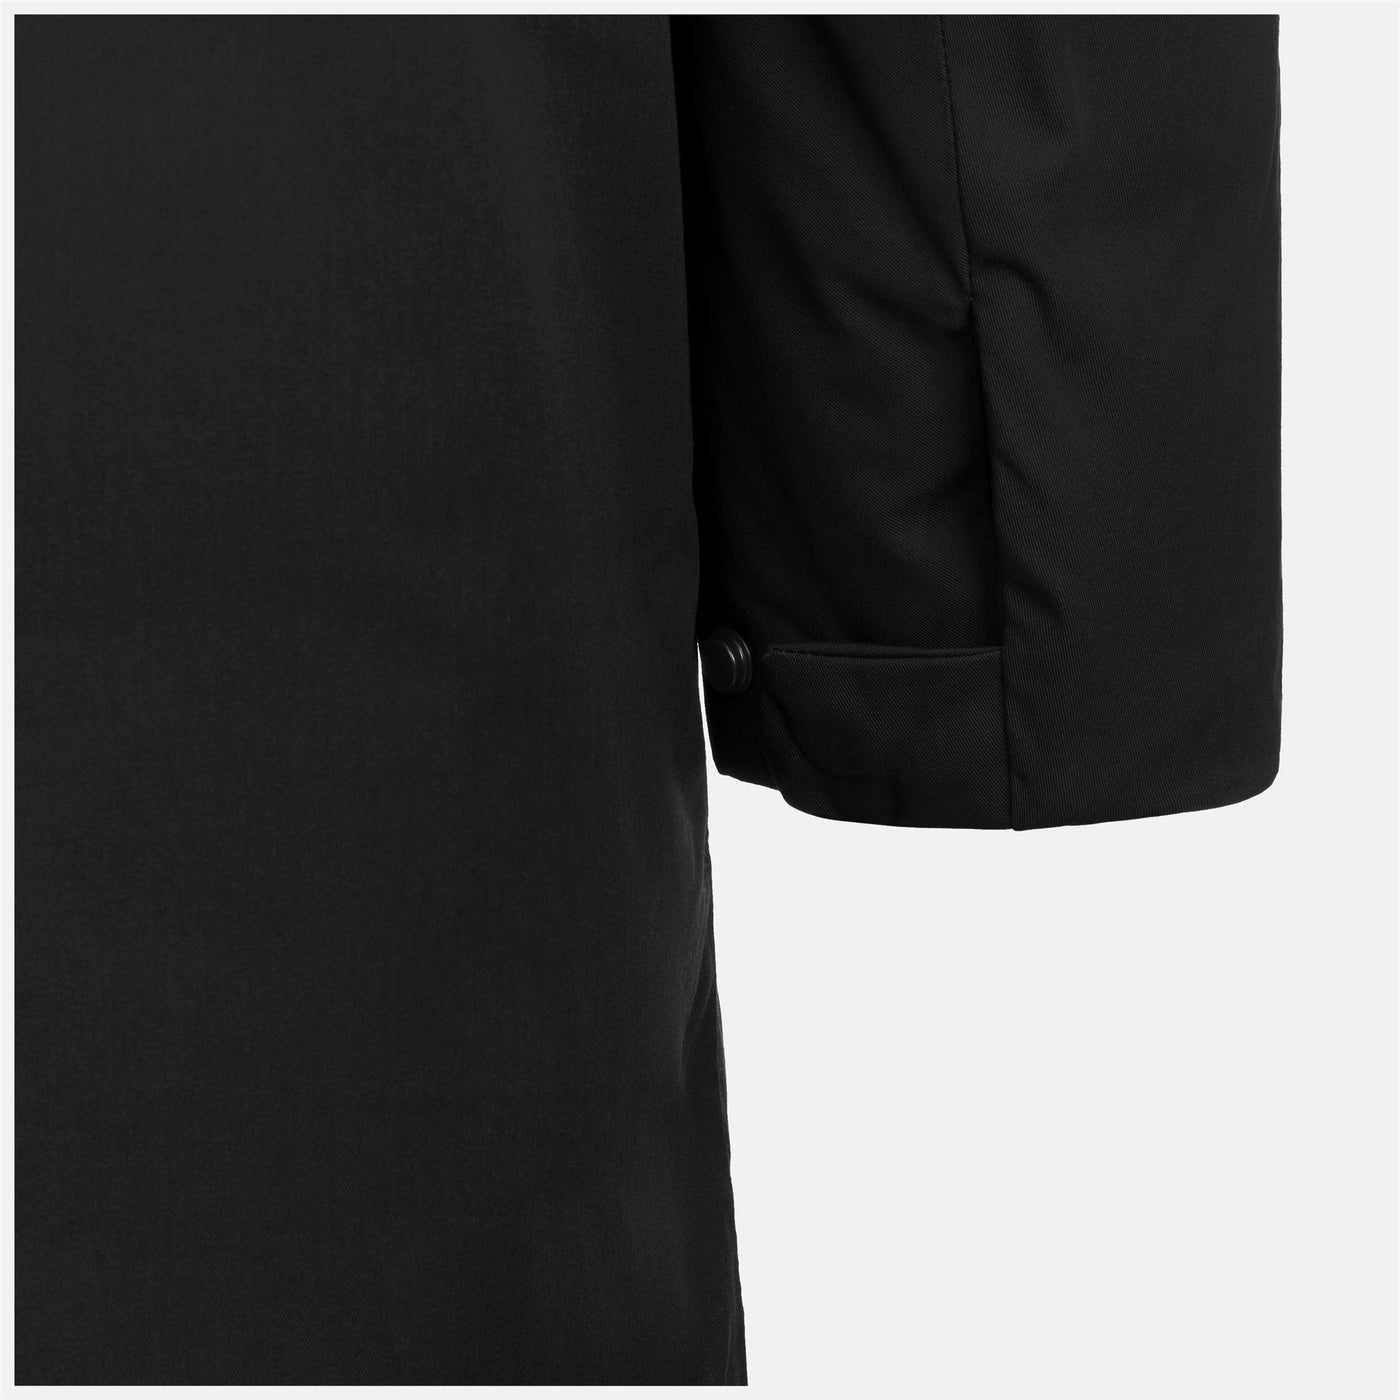 Jackets Man JEREMY THERMO COTTON 3/4 Length BLACK PURE Dressed Front (jpg Rgb)	